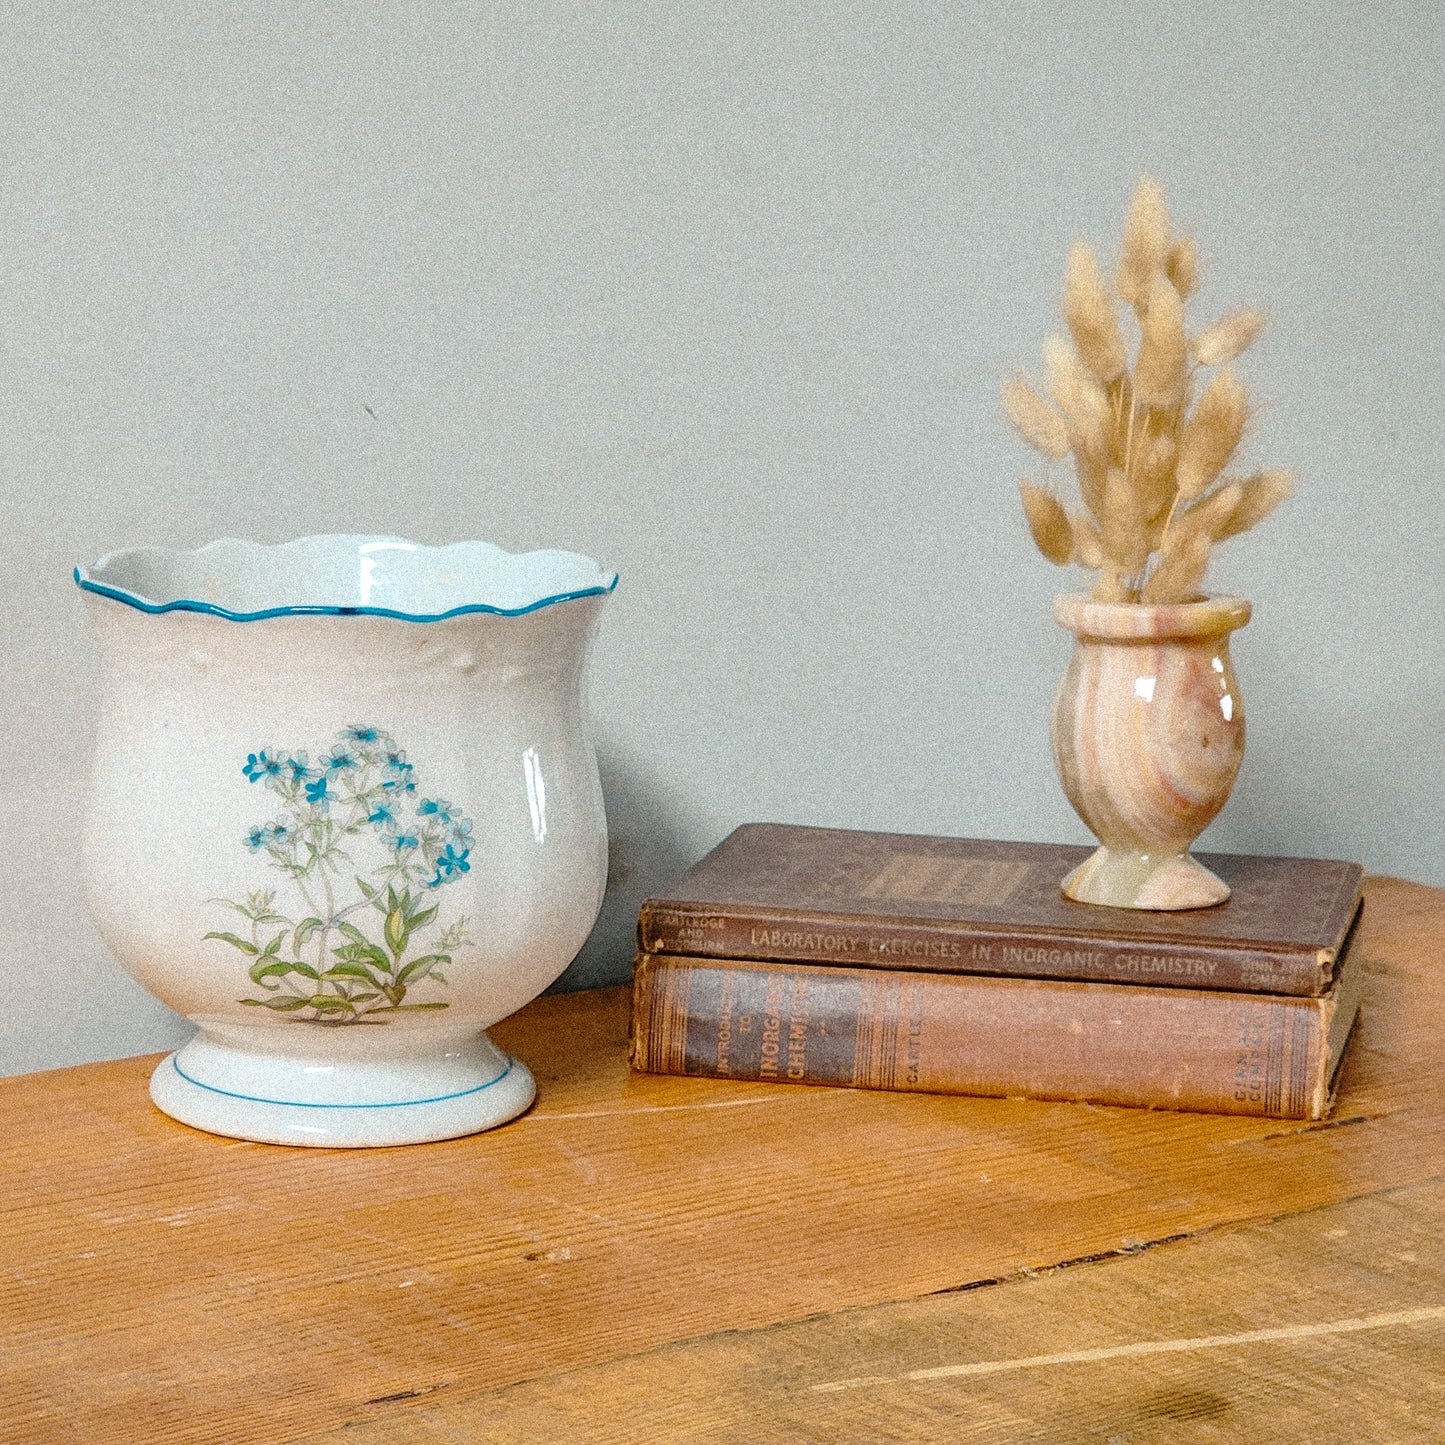 Vintage Double Sided Ceramic Planter - Reclaimed Mt. Goods